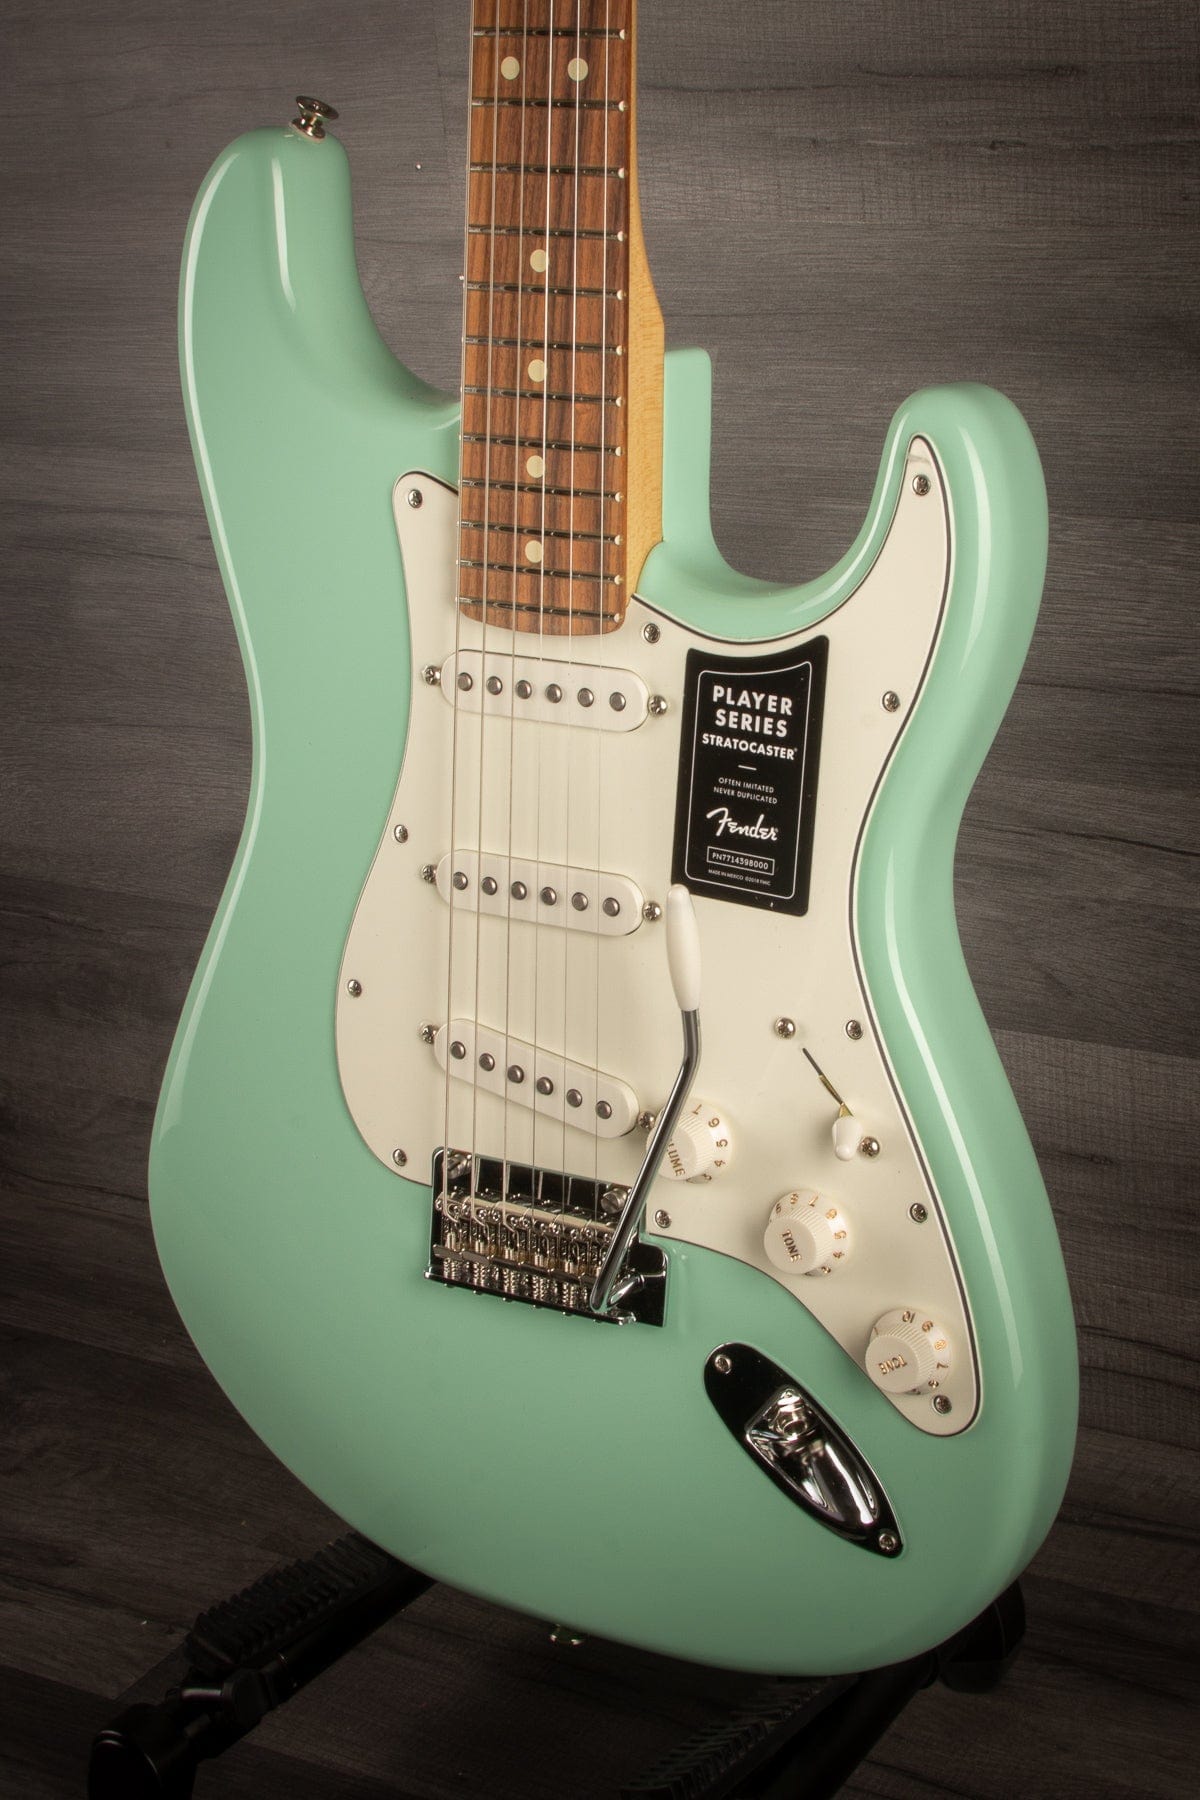 Fender Electric Guitar Fender Limited Edition Player Stratocaster - Surf Green, Matching Headstock